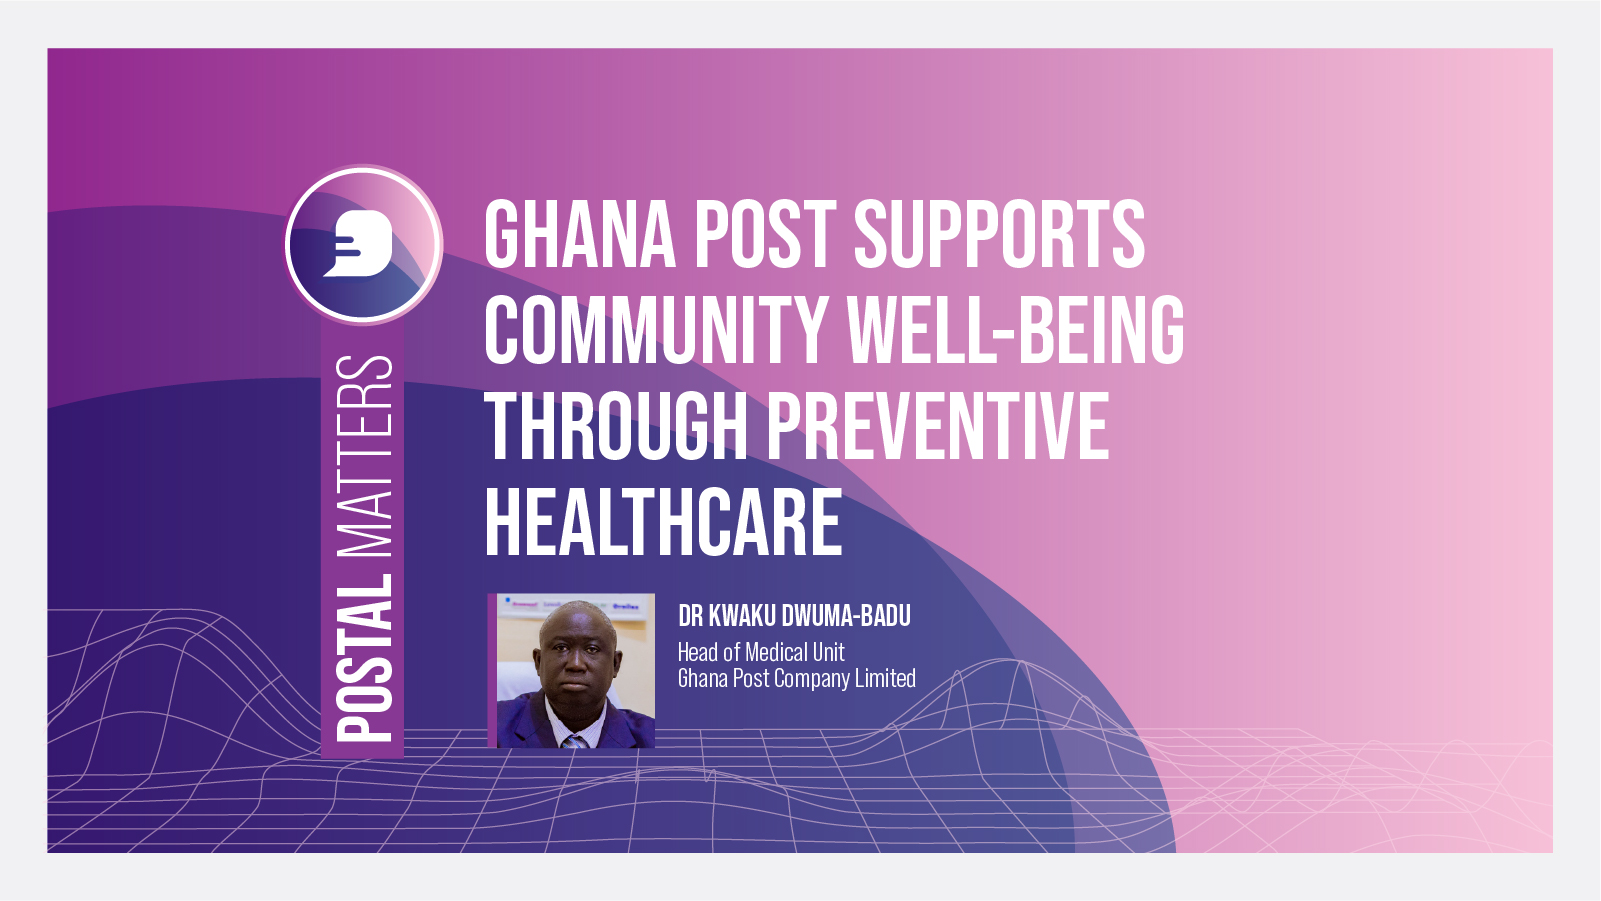 Ghana Post supports community well-being through preventive healthcare